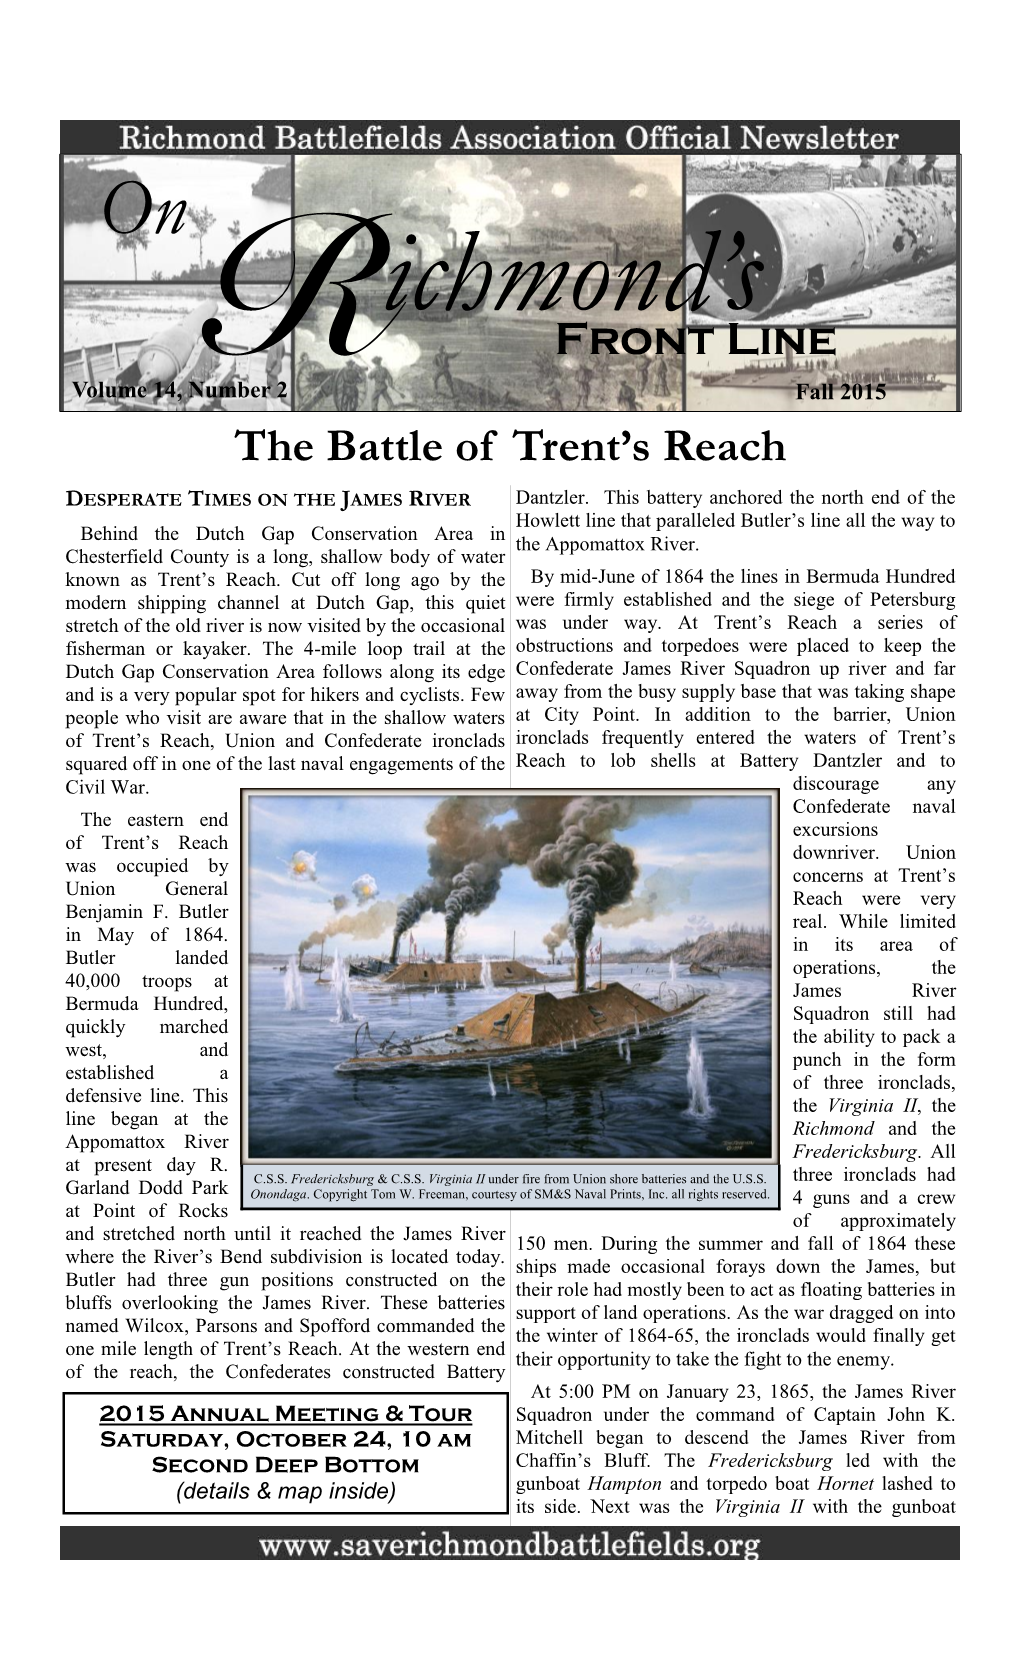 The Battle of Trent's Reach